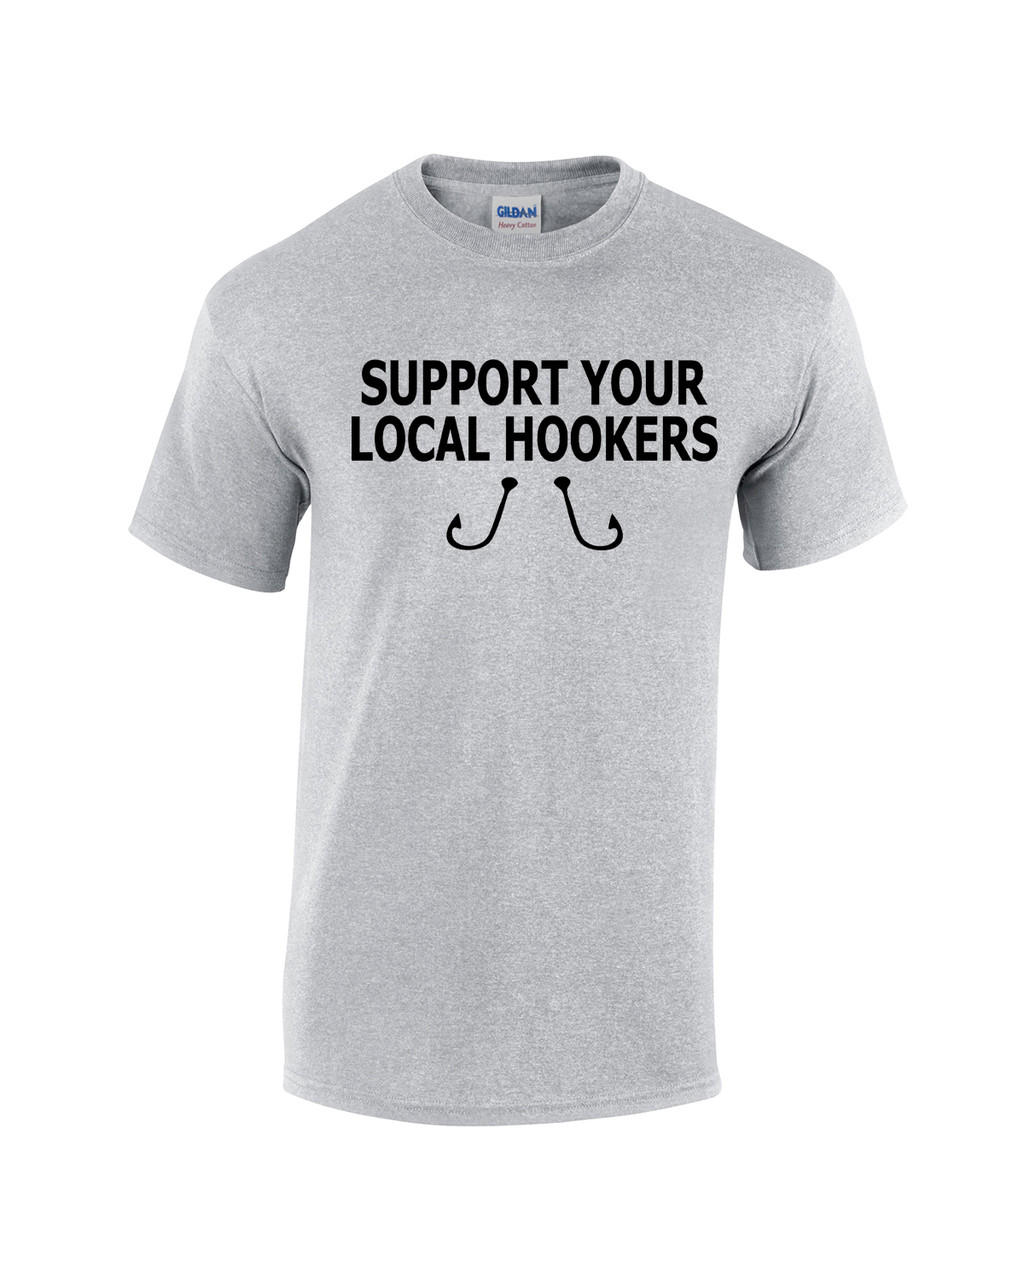 SUPPORT YOUR LOCAL HOOKERS SHIRT